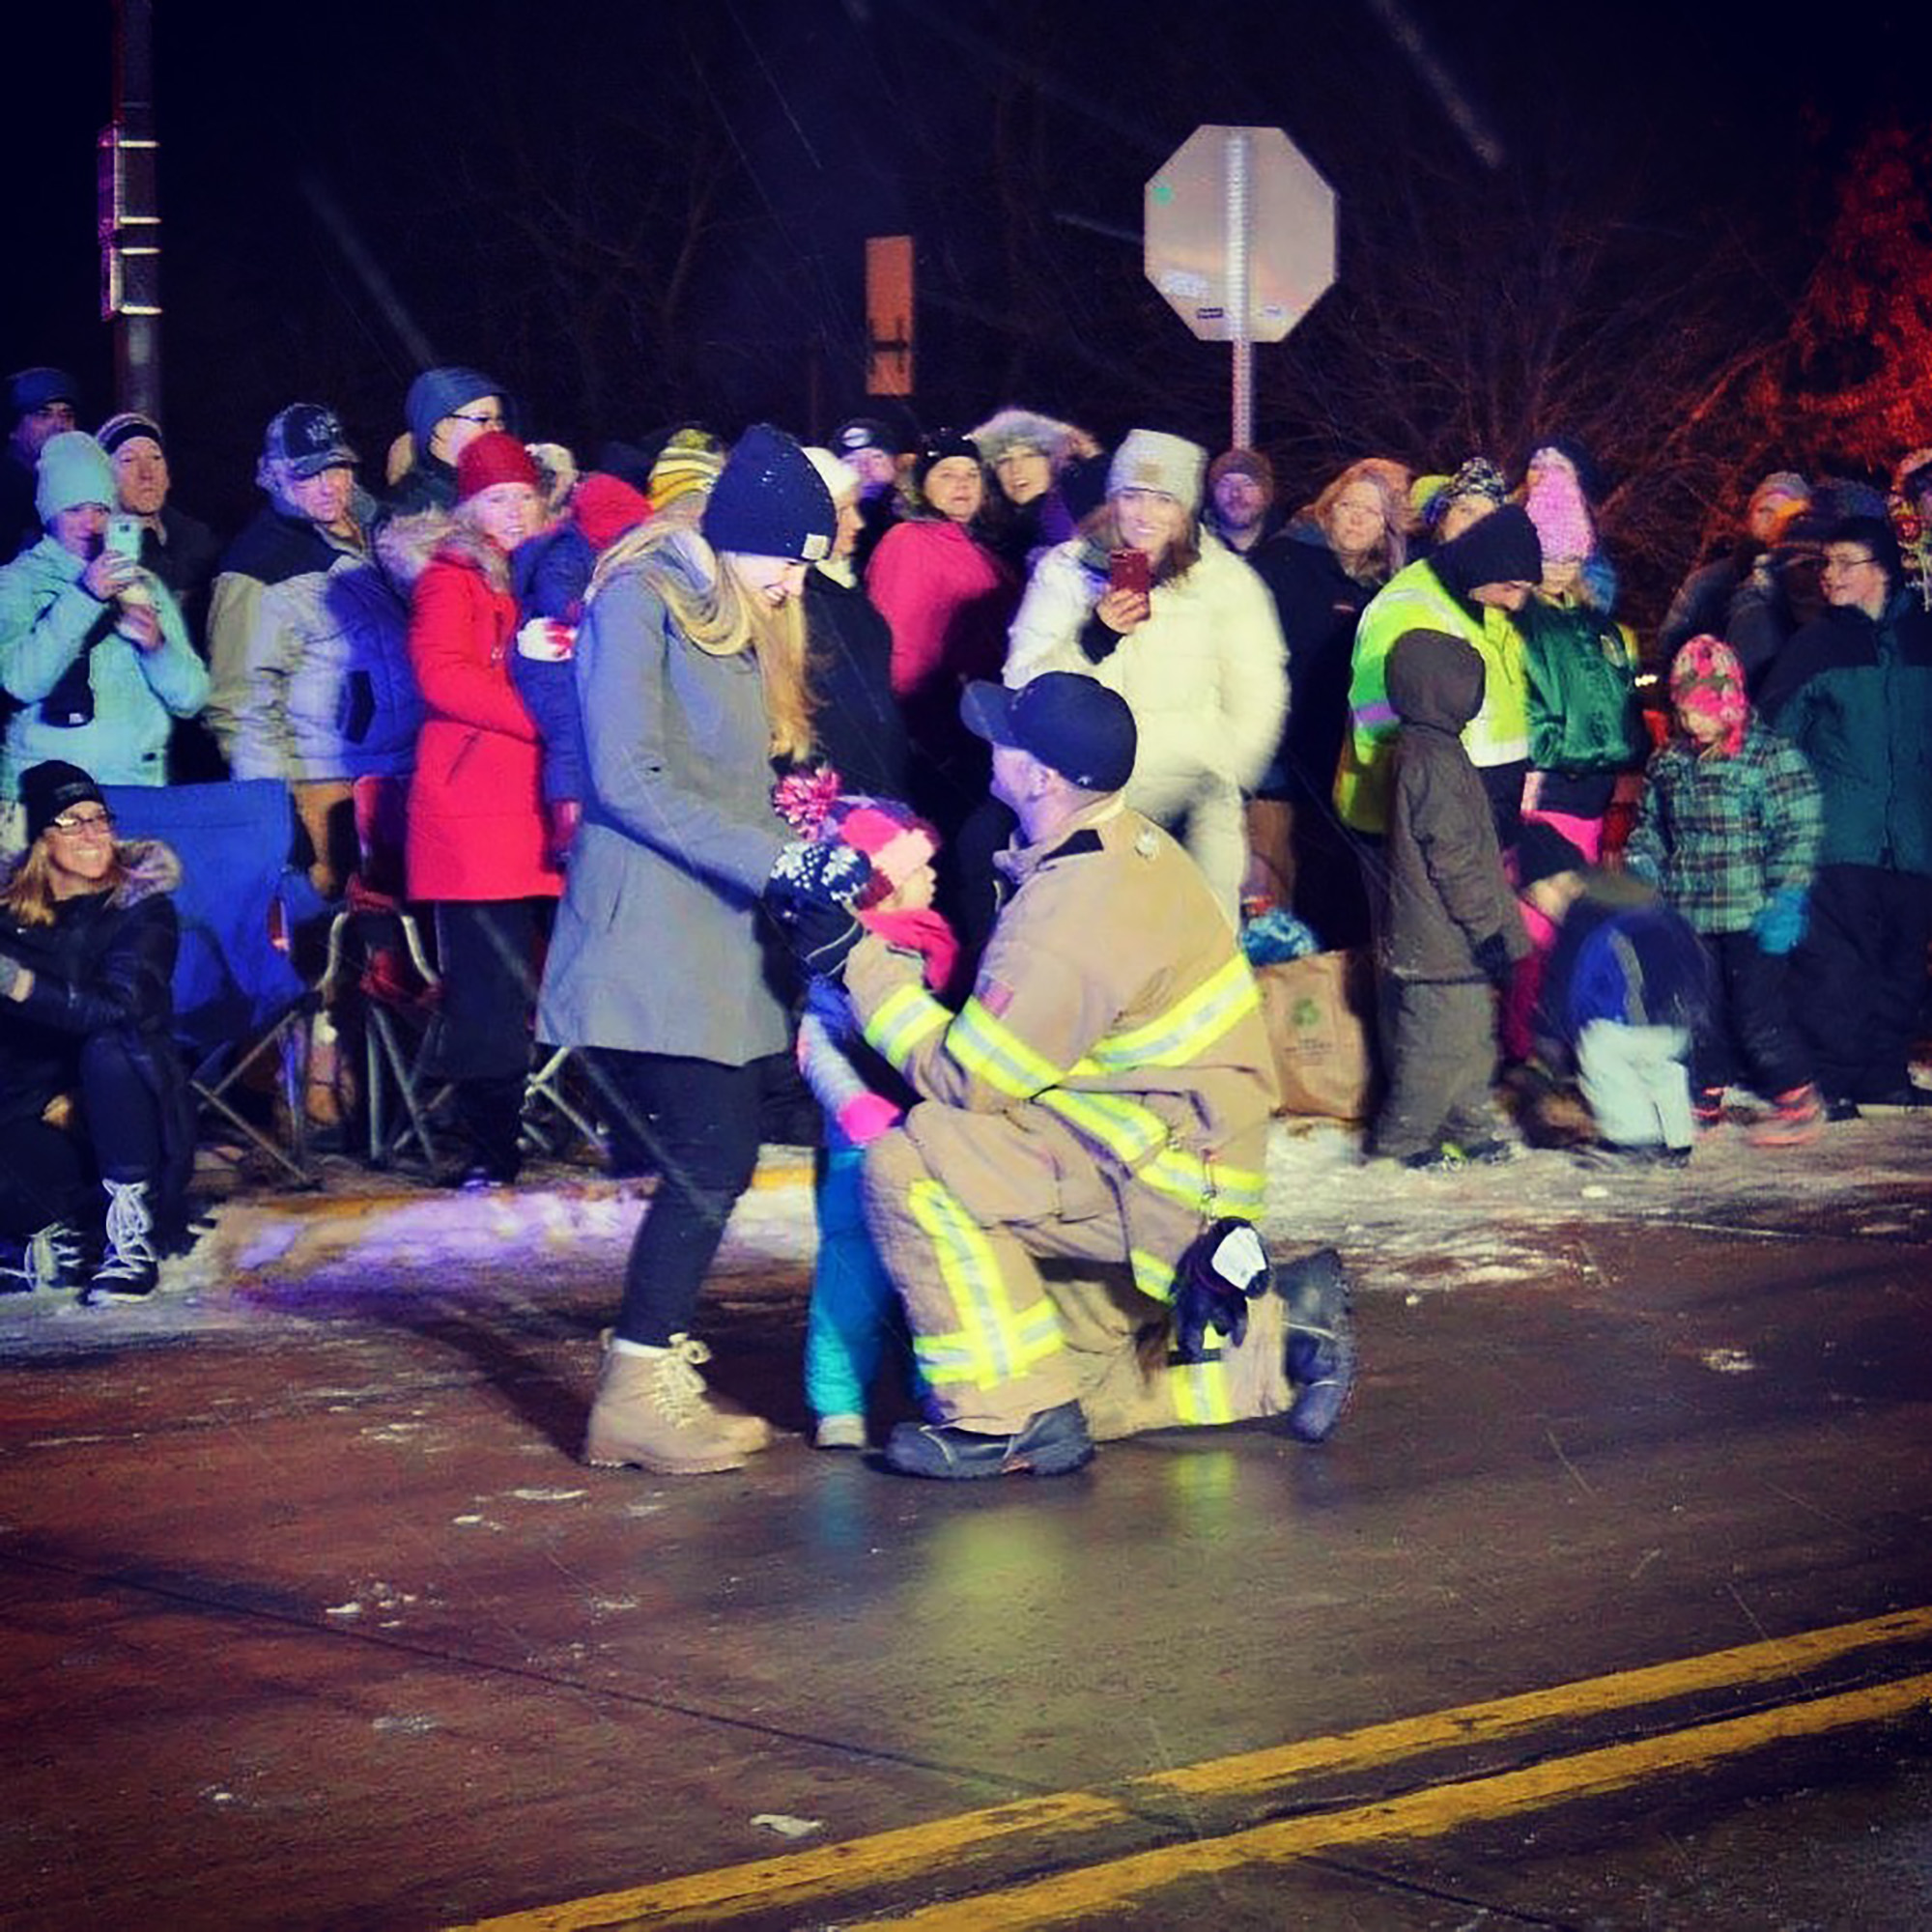 PHOTO: Matt Poliak of the Menomonie Fire Department in Wisconsin proposed to his girlfriend, Grace Johnson, and her daughter, Isla, at the town's Christmas parade on Dec. 14, 2017.